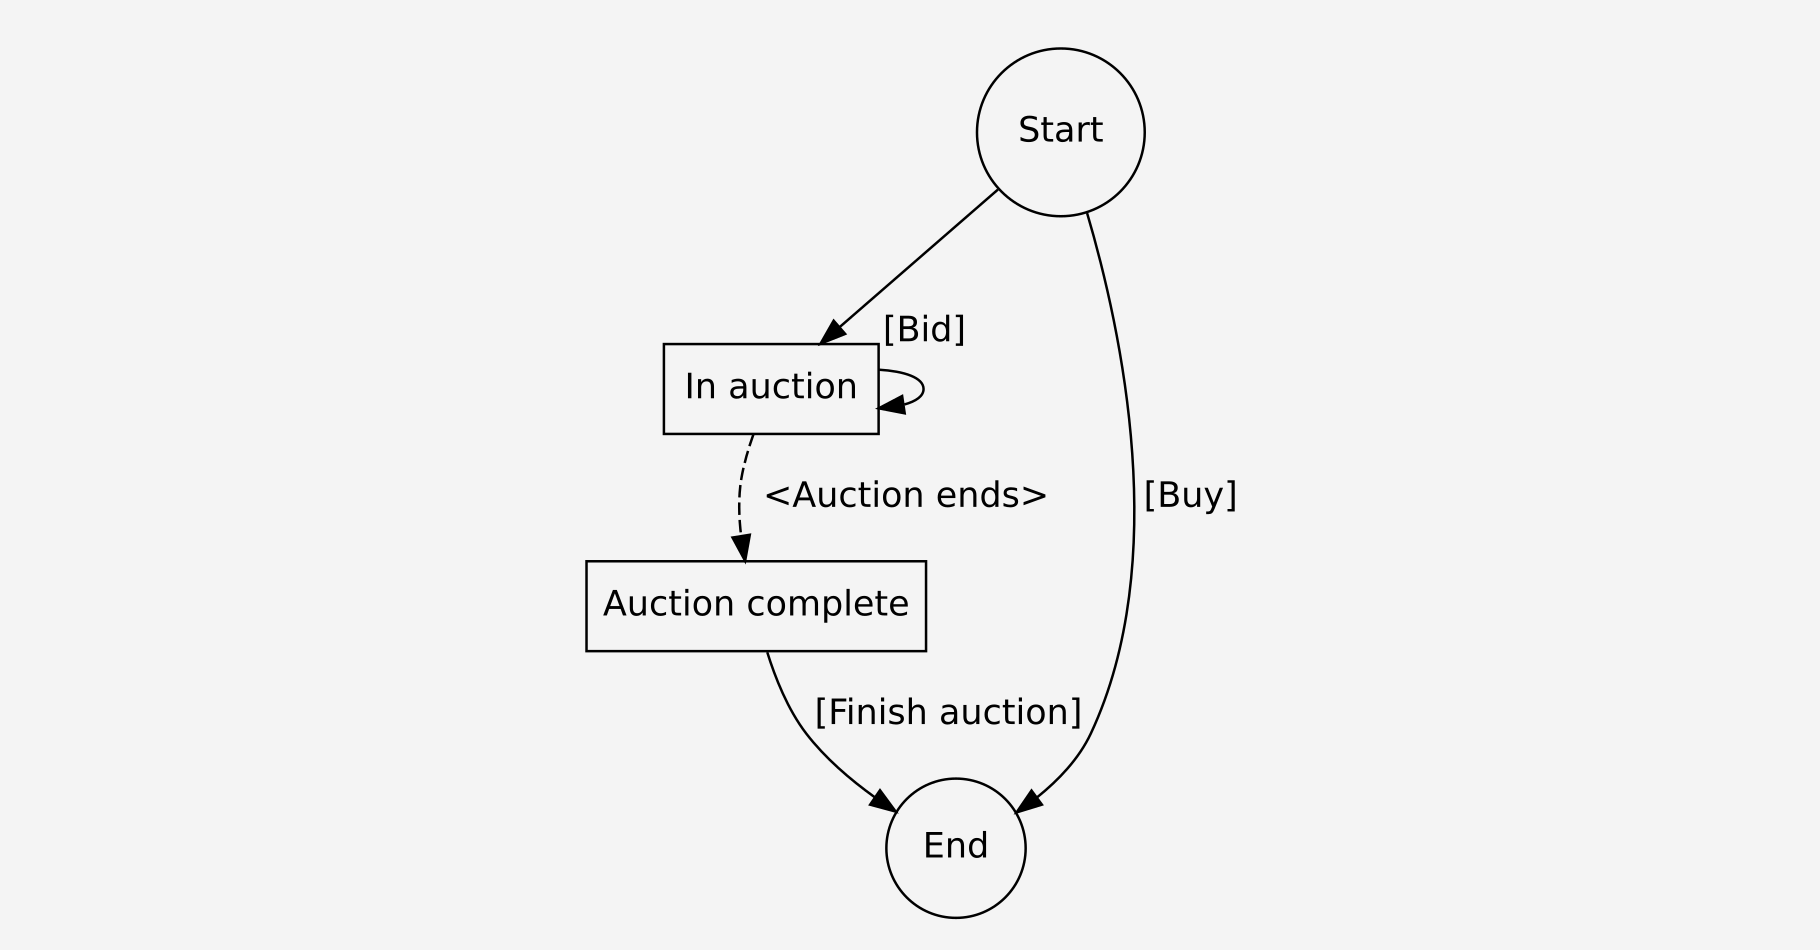 DomainSale process for buyers. Actions carried out by the buyer are wrapped in square brackets. Actions carried out by other entities are wrapped in angular brackets